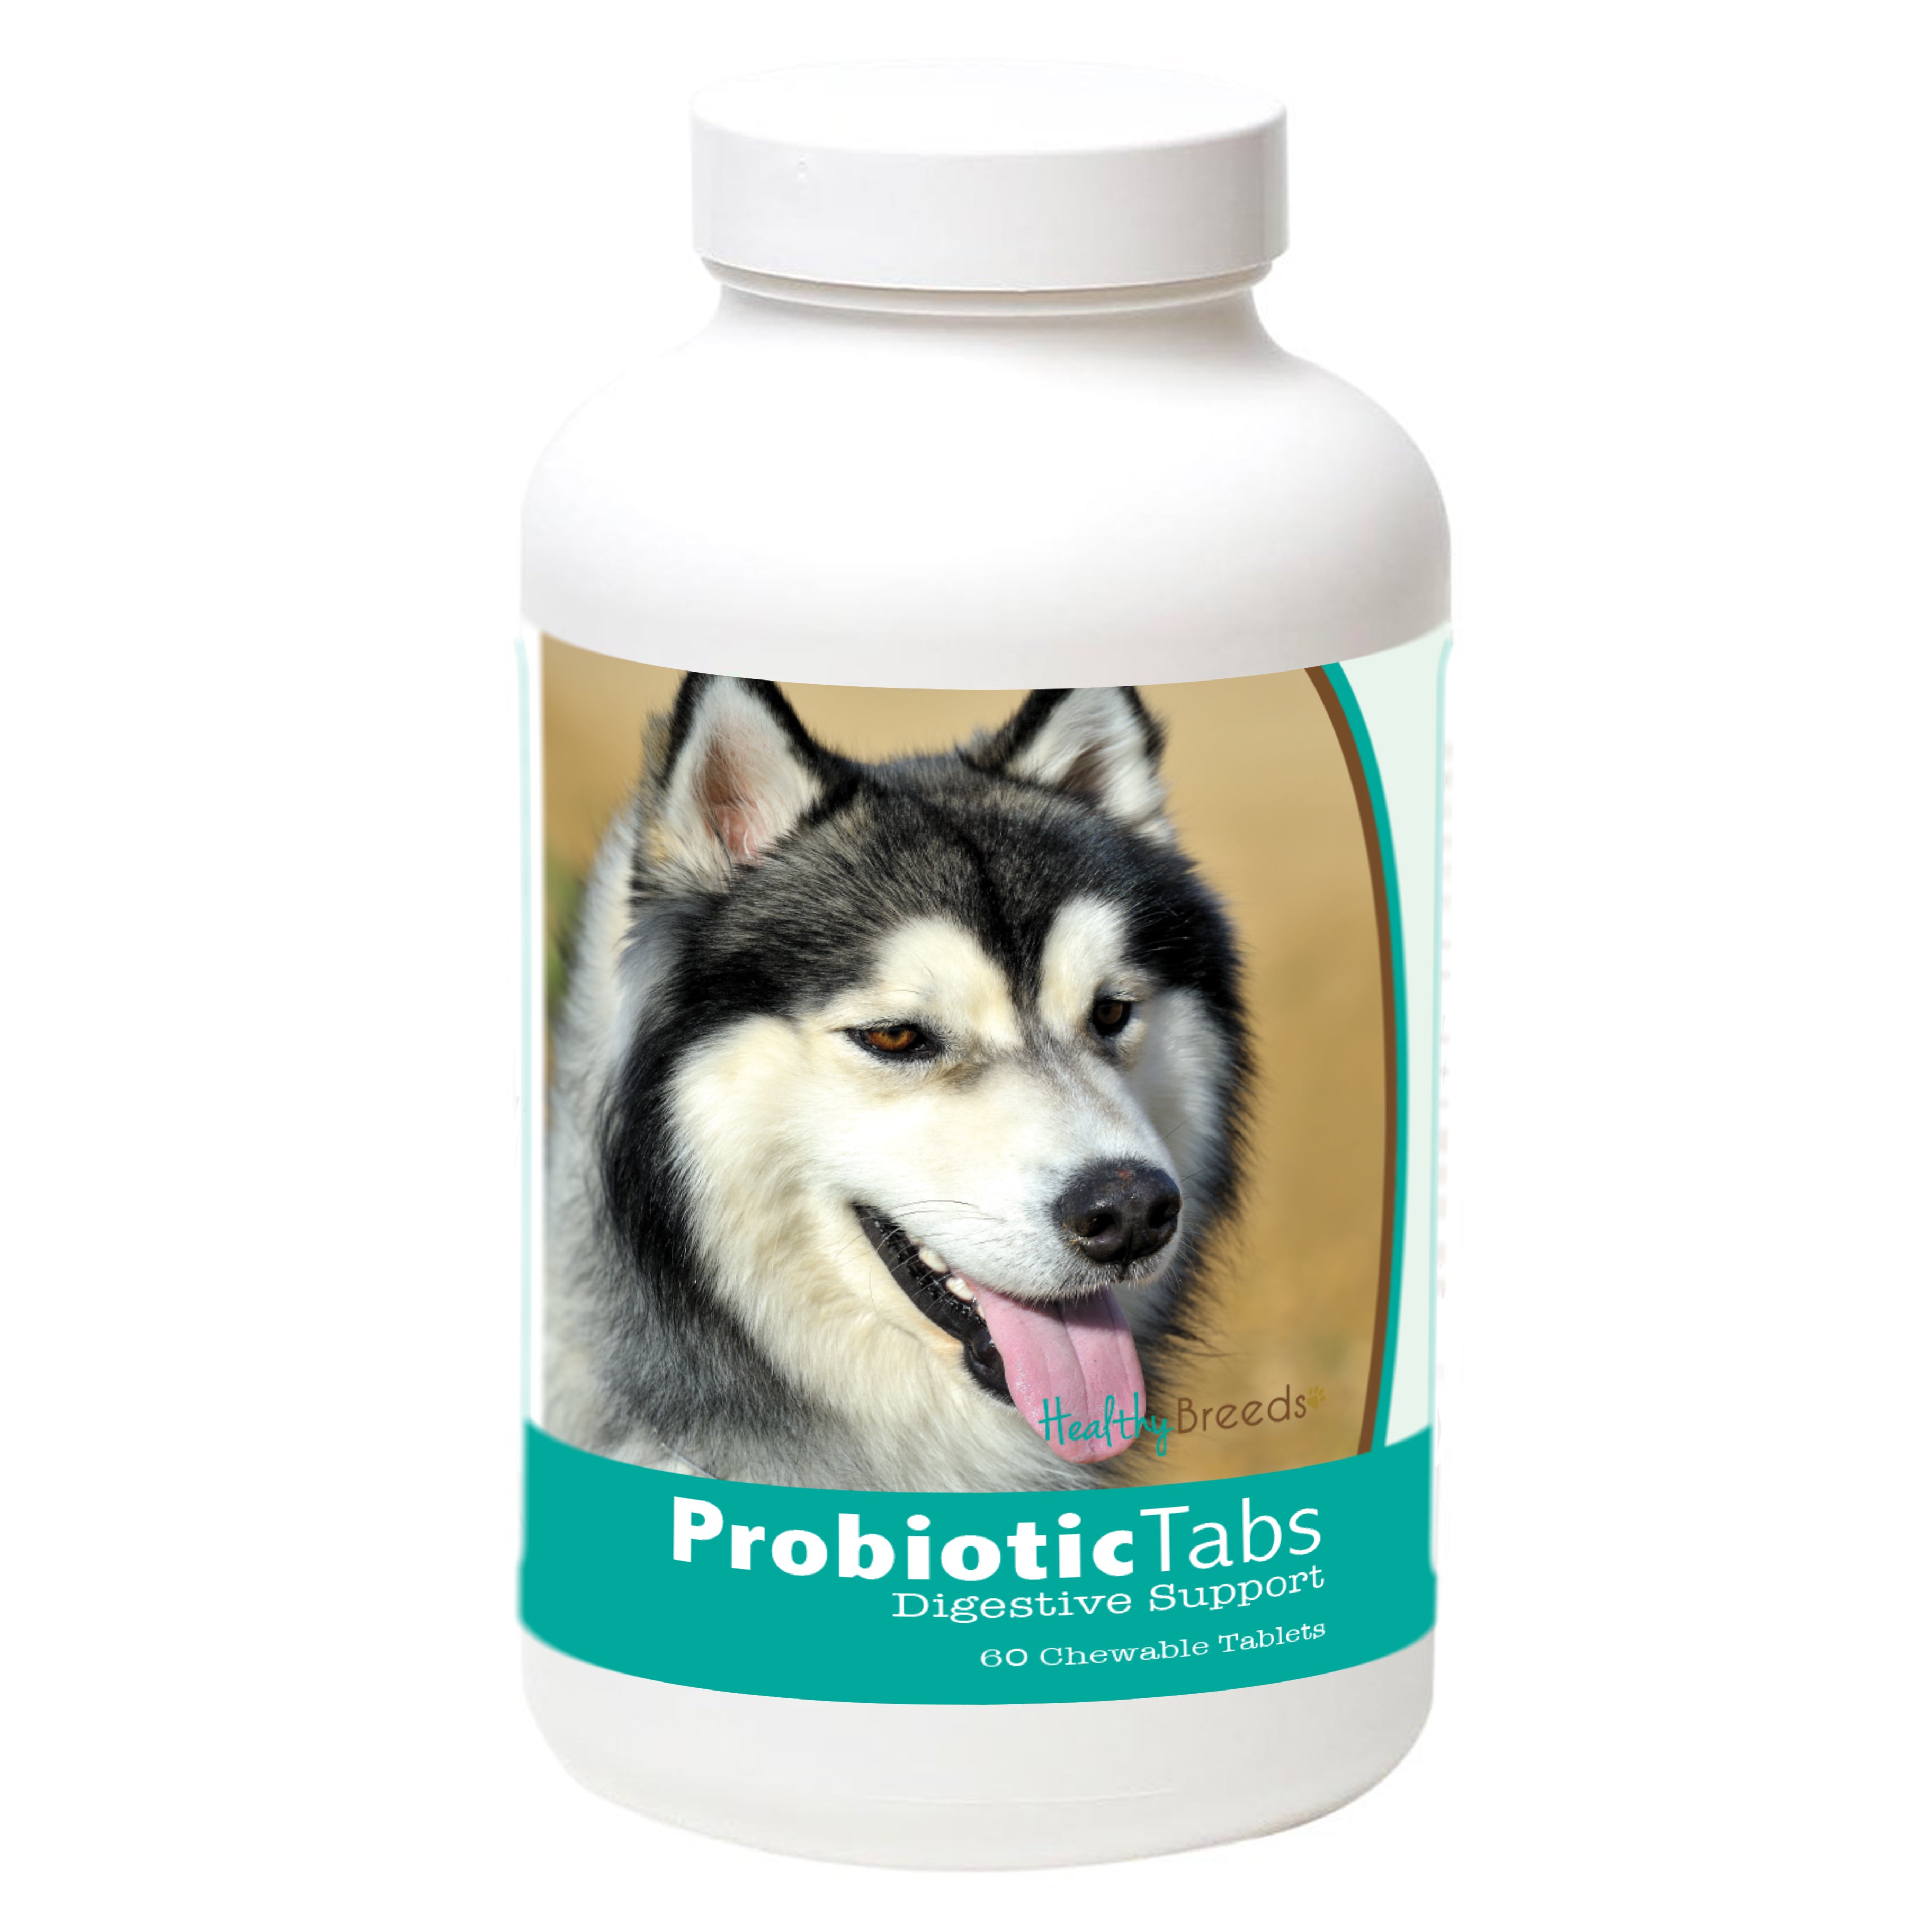 Siberian Husky Probiotic and Digestive Support for Dogs 60 Count